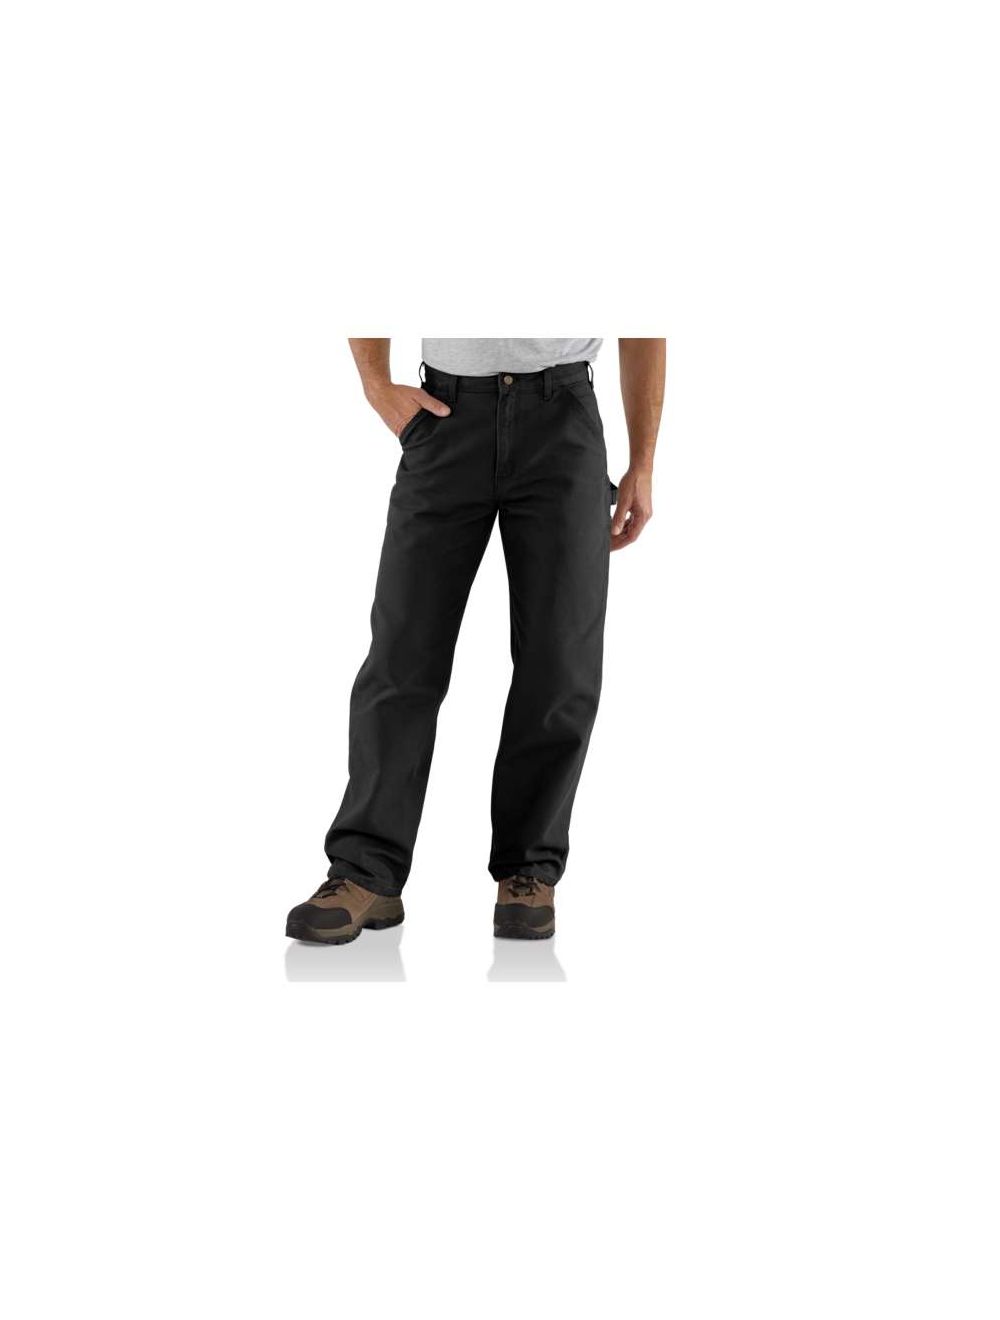 Carhartt Men's Flame Resistant Rugged Flex Relaxed Fit Duck Utility Work Pant